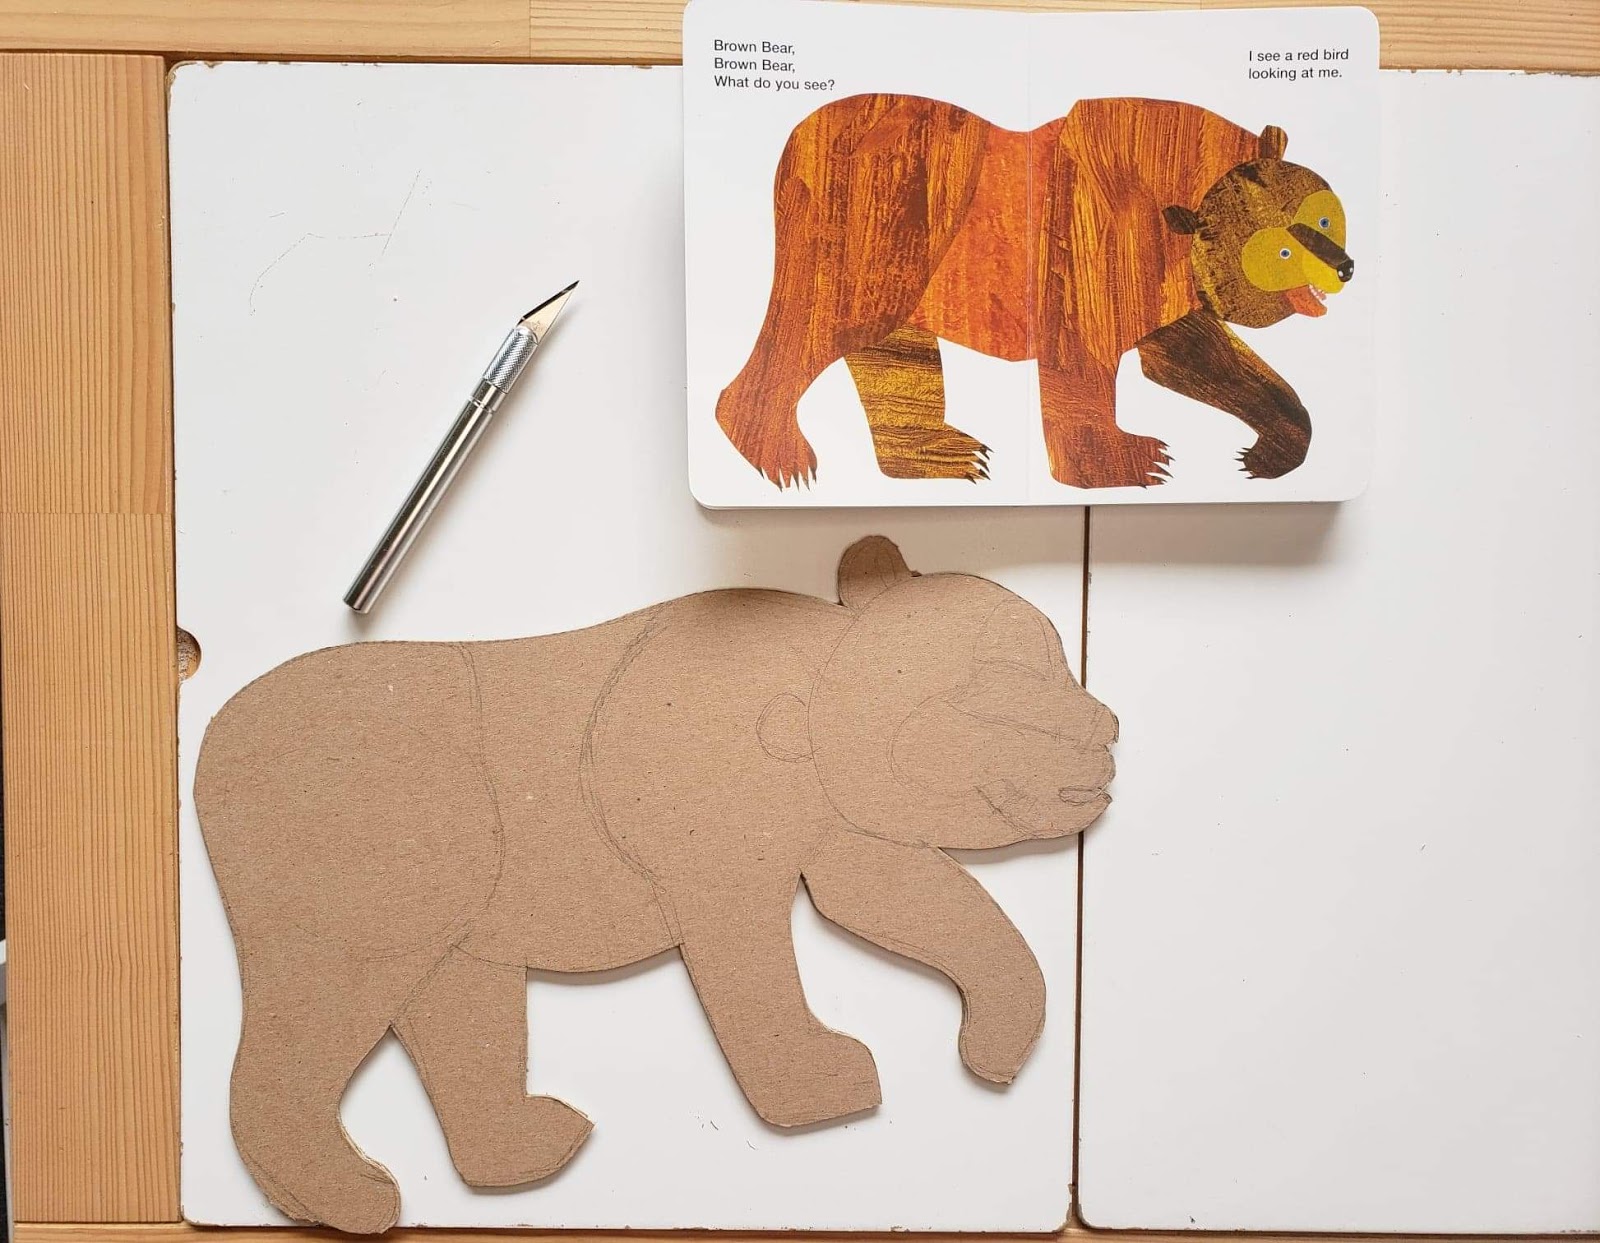 brown bear brown bear what do you see sensory puzzle